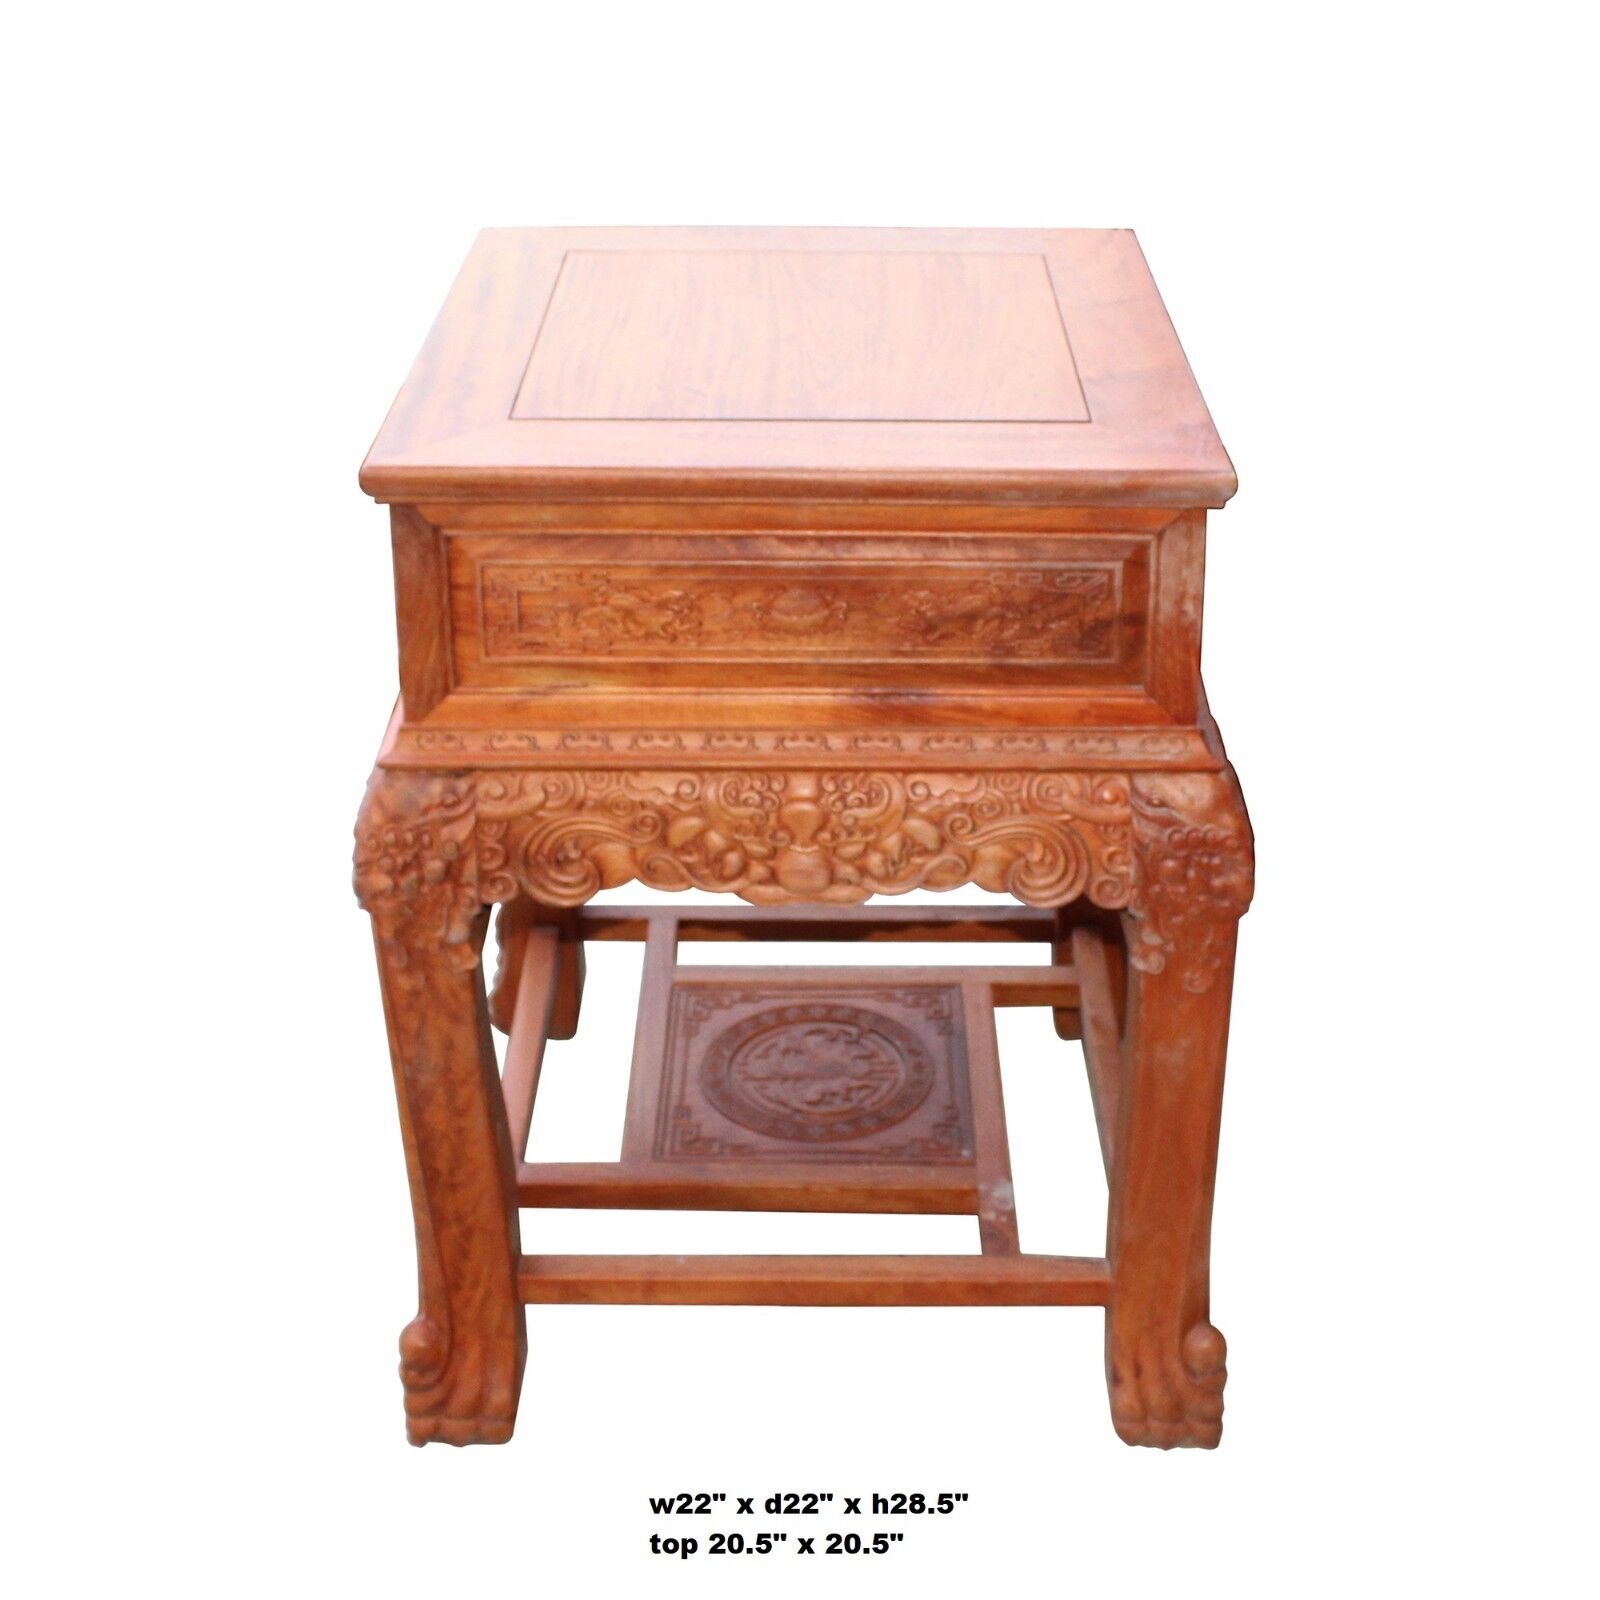 Chinese Oriental Huali Rosewood Foo Dogs Motif Tea Table Stand cs4529 Handmade Does Not Apply - фотография #7